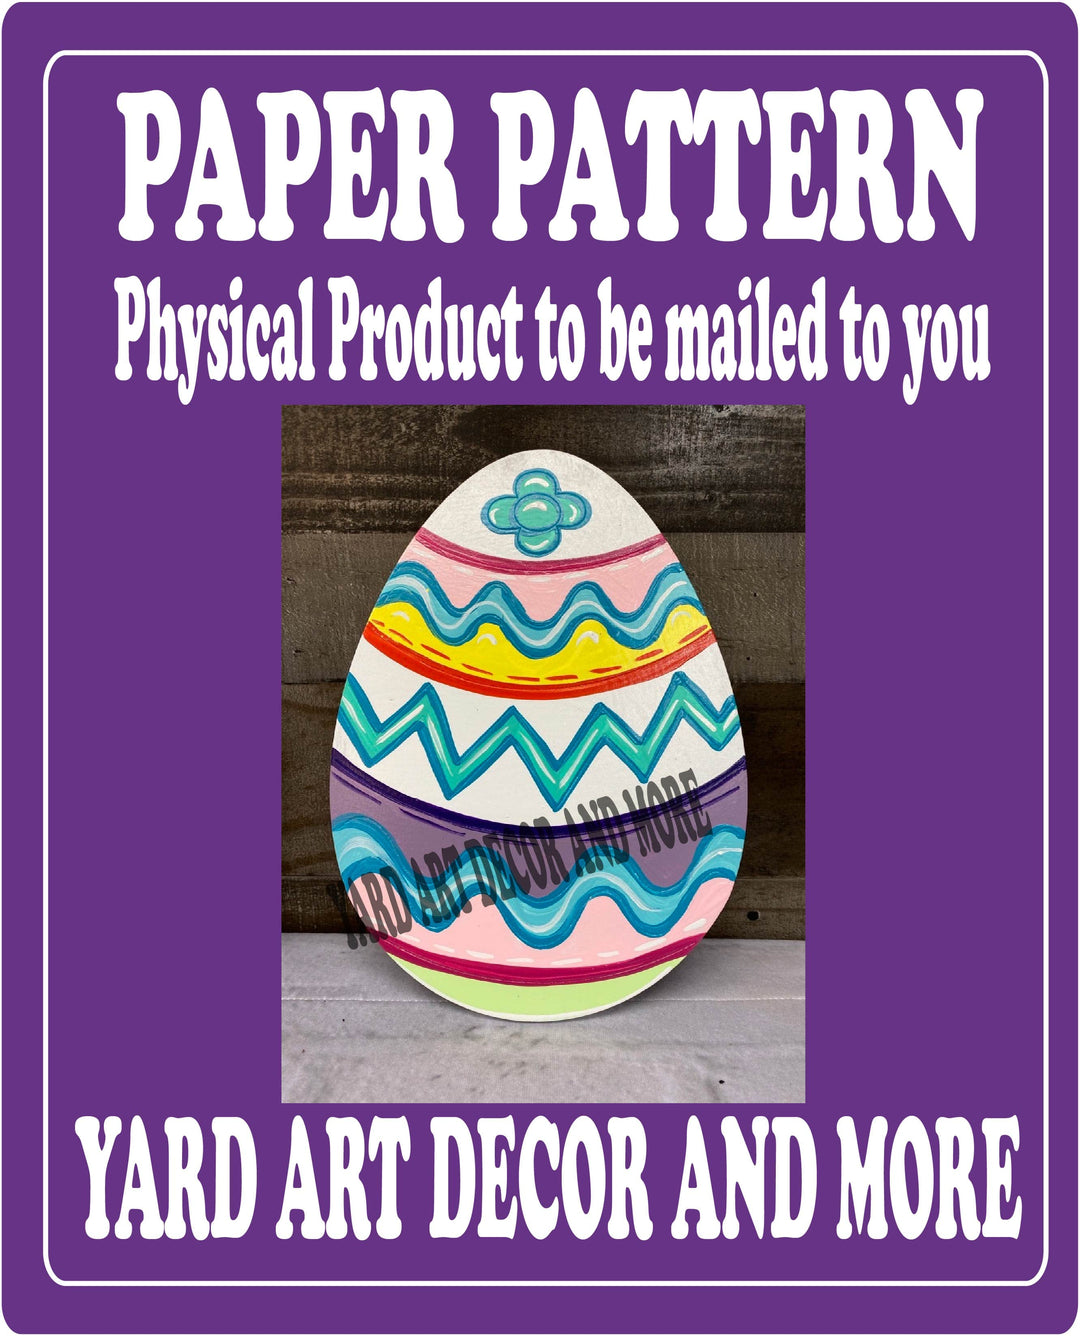 Easter Egg with wavy lines yard art decor paper pattern